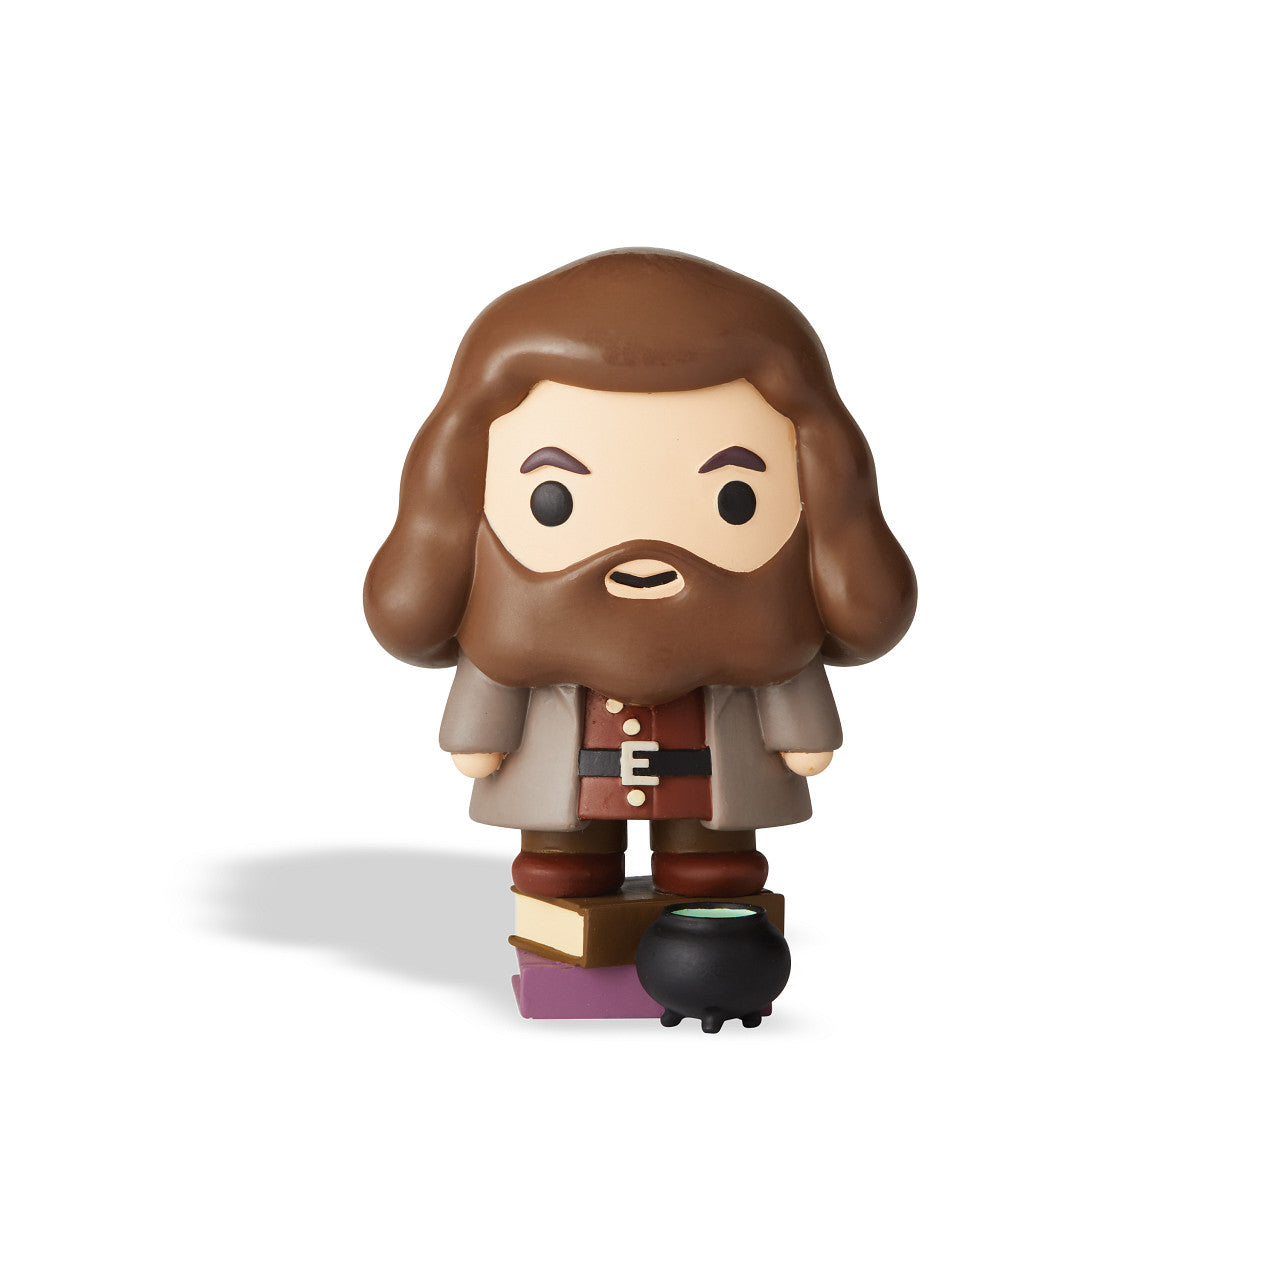 Harry Potter's Hagrid Charm Figurine  Rubeus Hagrid from Harry Potter interpreted in the popular Japanese "chibi" art style in the new CHARMS collection.